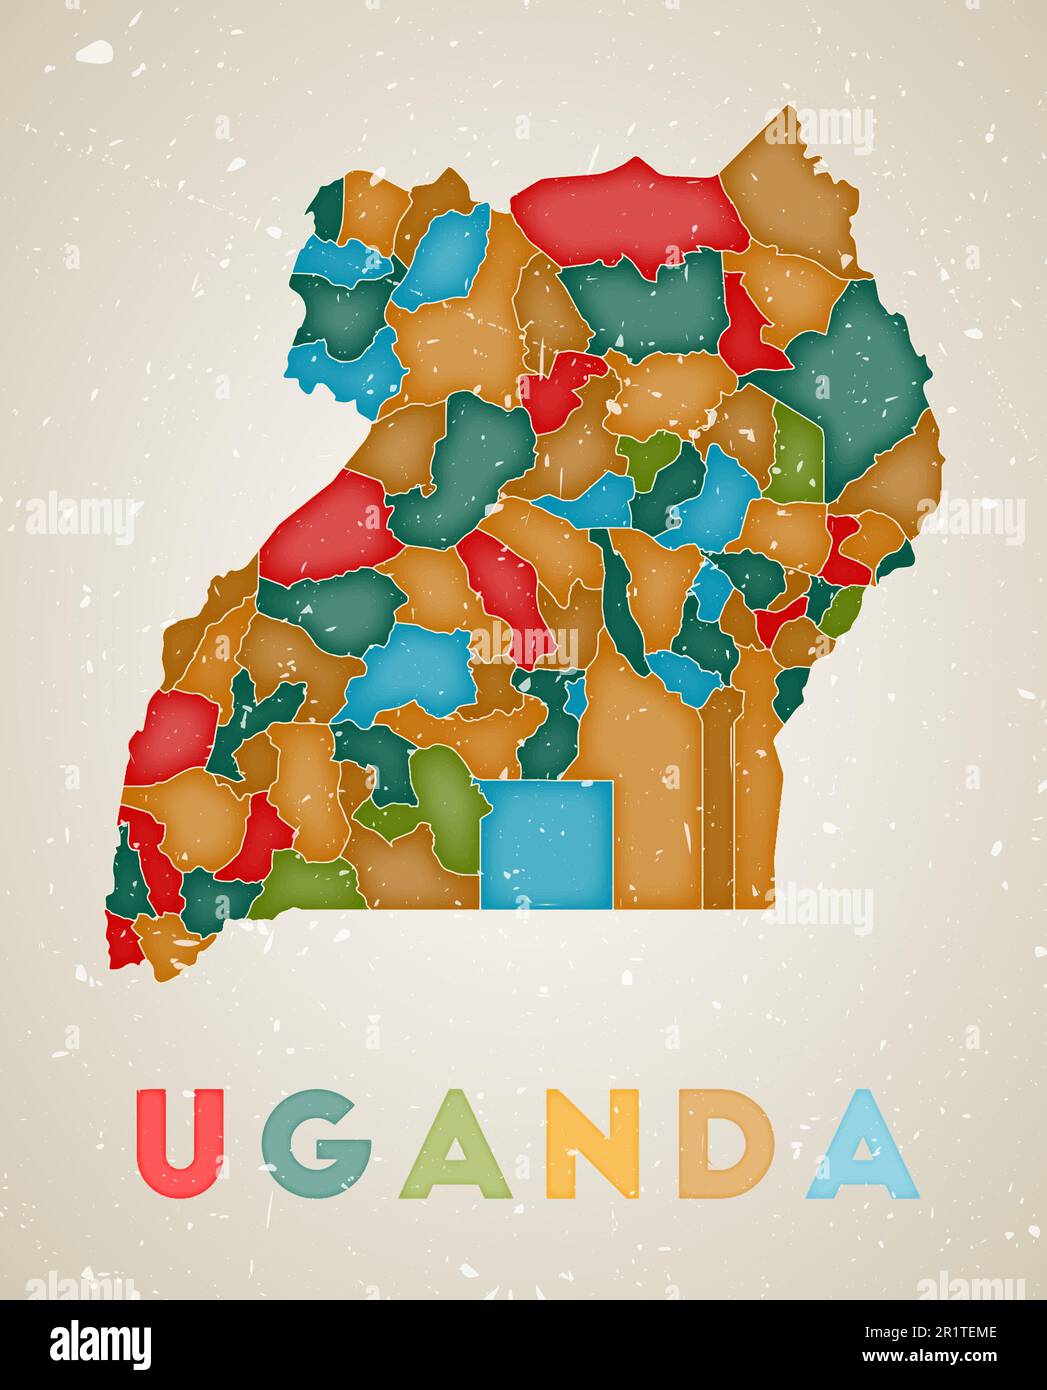 Uganda map. Country poster with colored regions. Old grunge texture ...